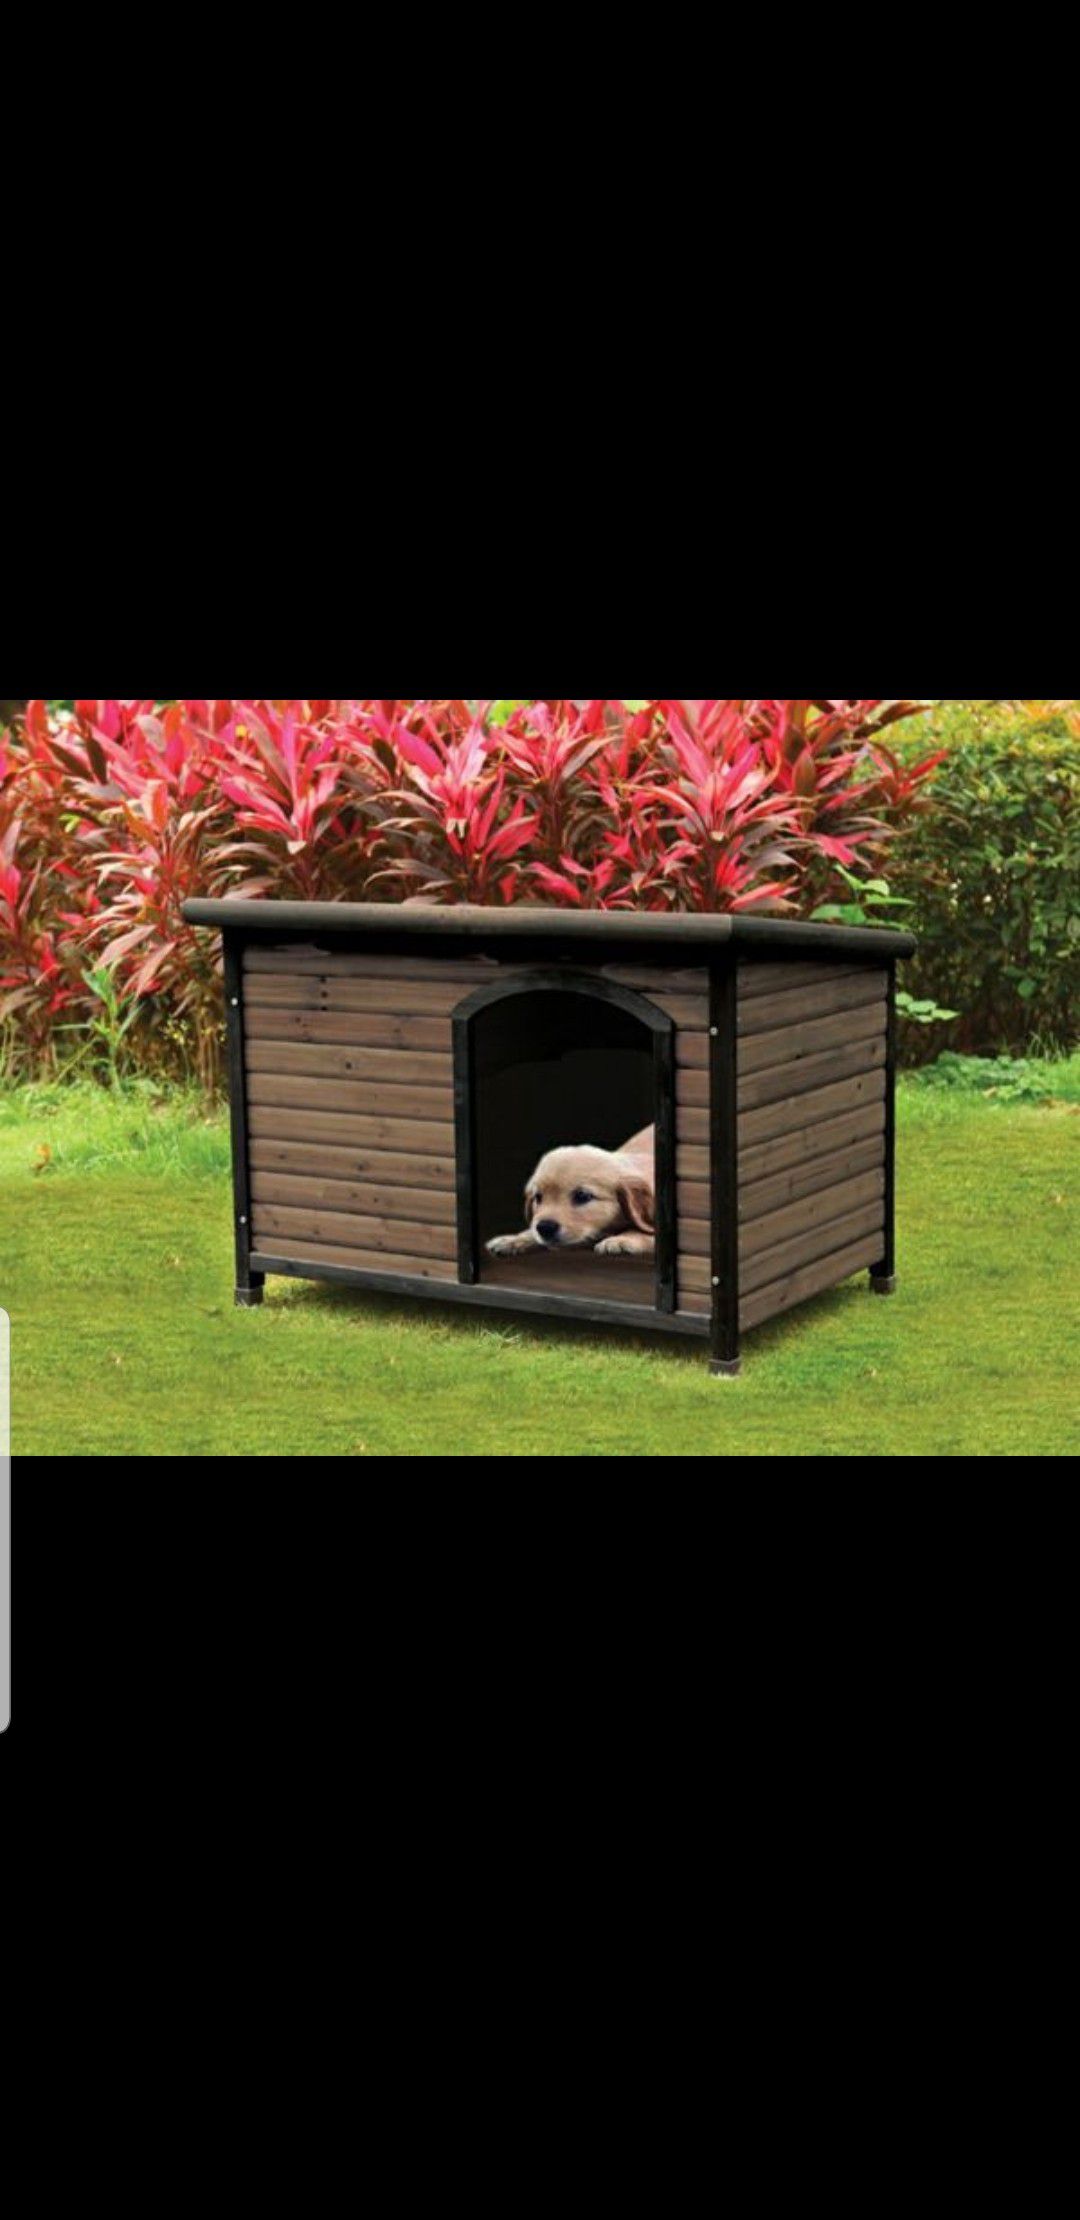 Brand new wooden cabin doghouse!